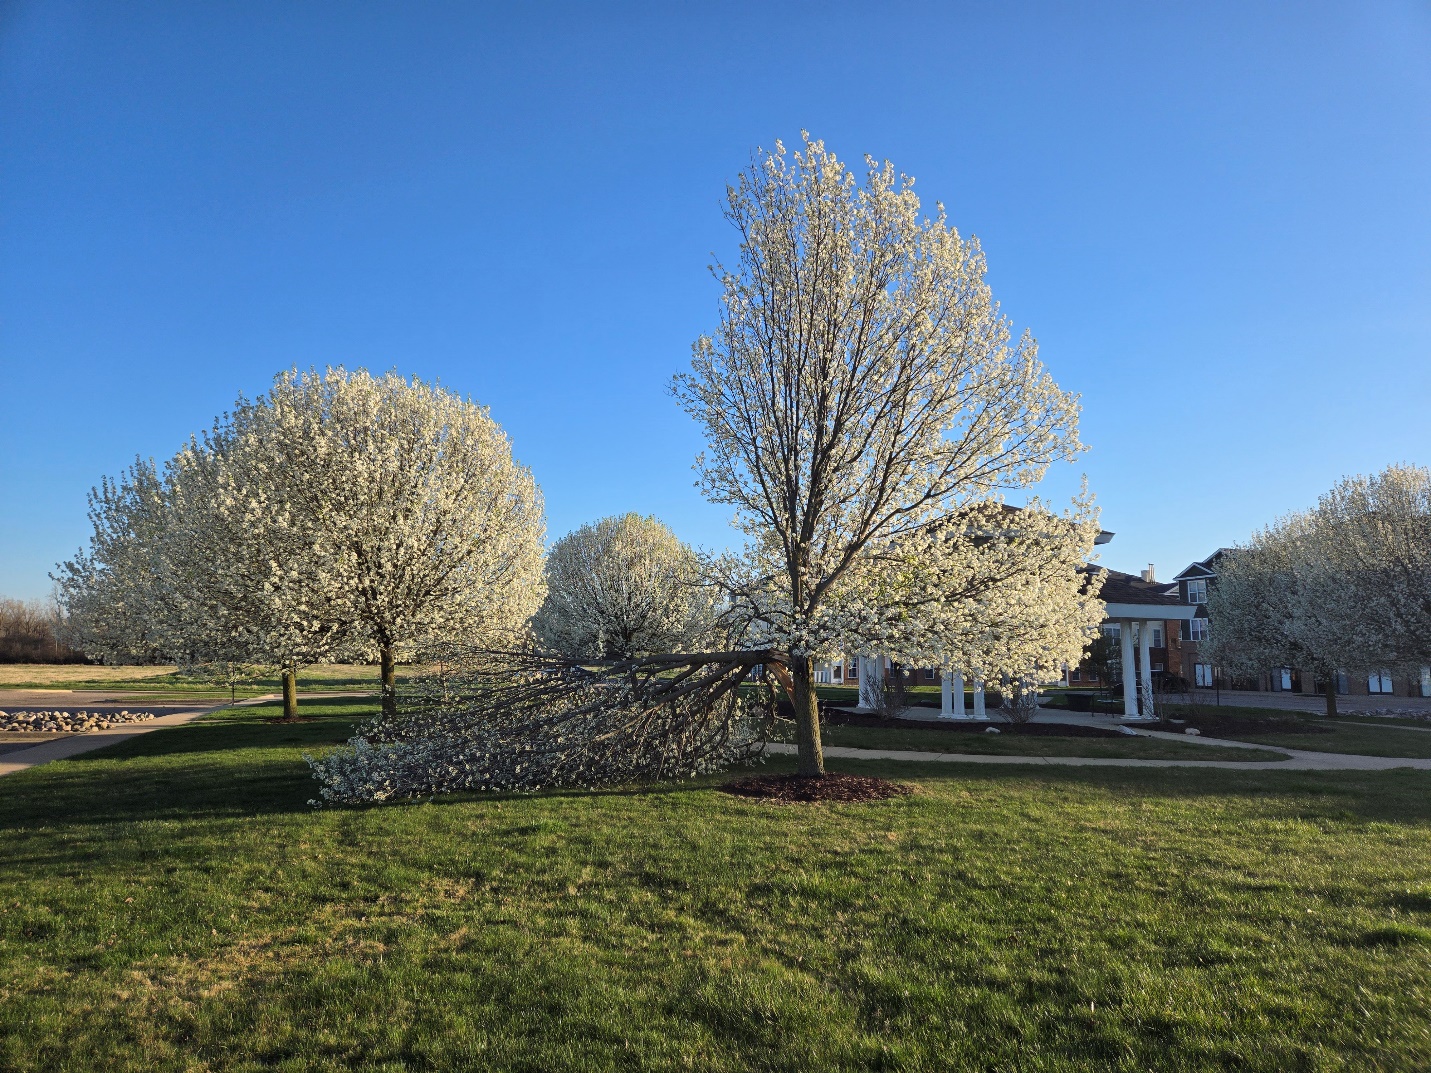 A callery pear tree with broken limbs.